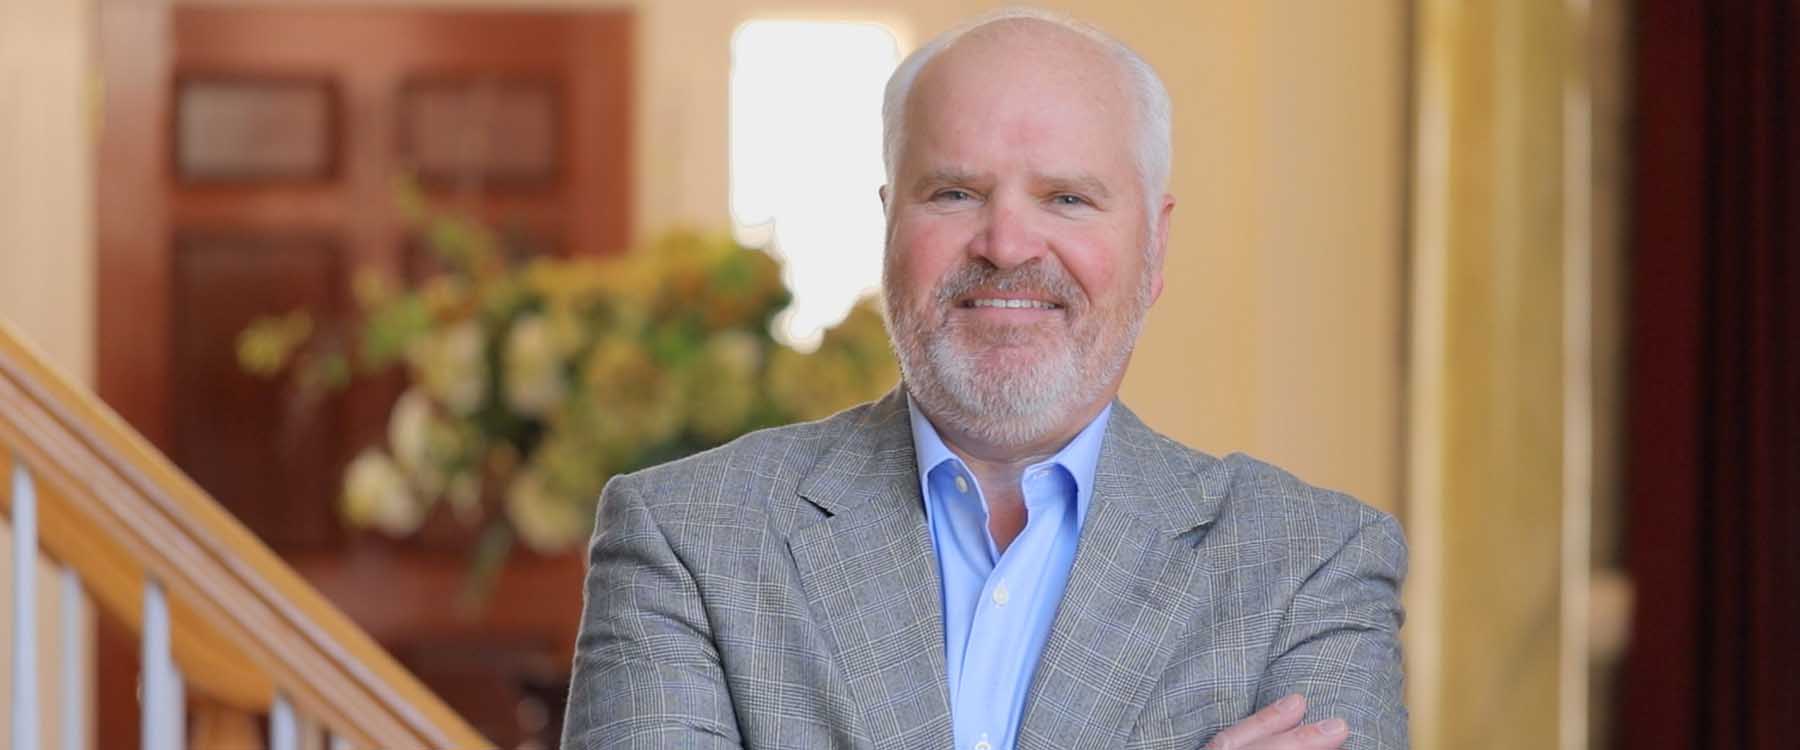 A $2.5 million gift from Robert A. Niblock ’84 will establish the Niblock Scholars Program to directly support students in his alma mater’s Belk College of Business at UNC Charlotte. 